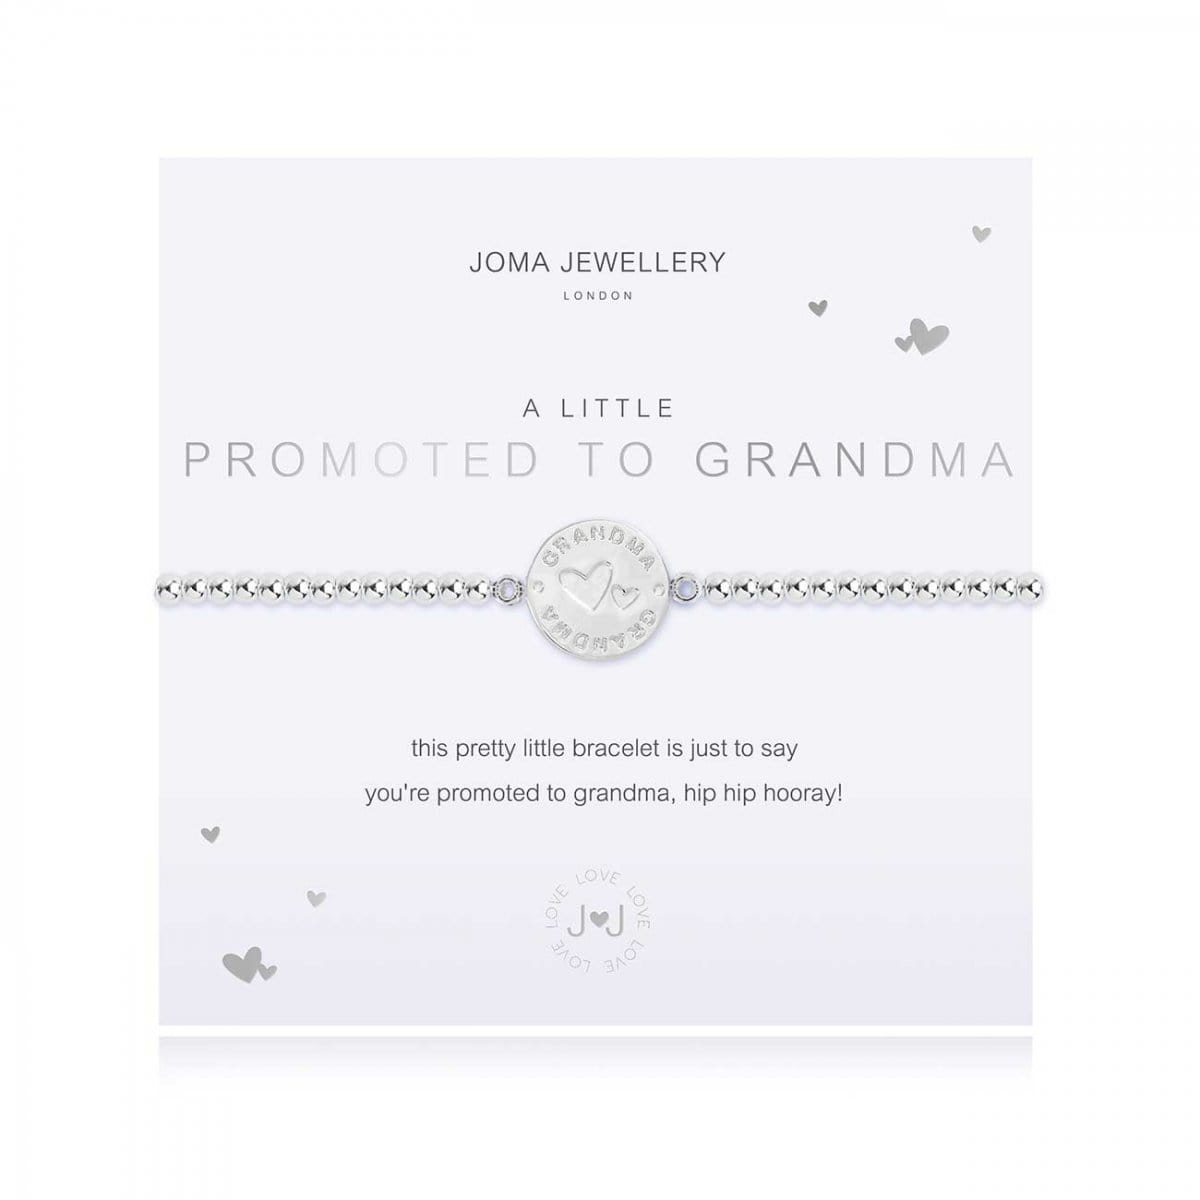 Joma Jewellery Bracelet Joma Jewellery Bracelet - a little Promoted To Grandma